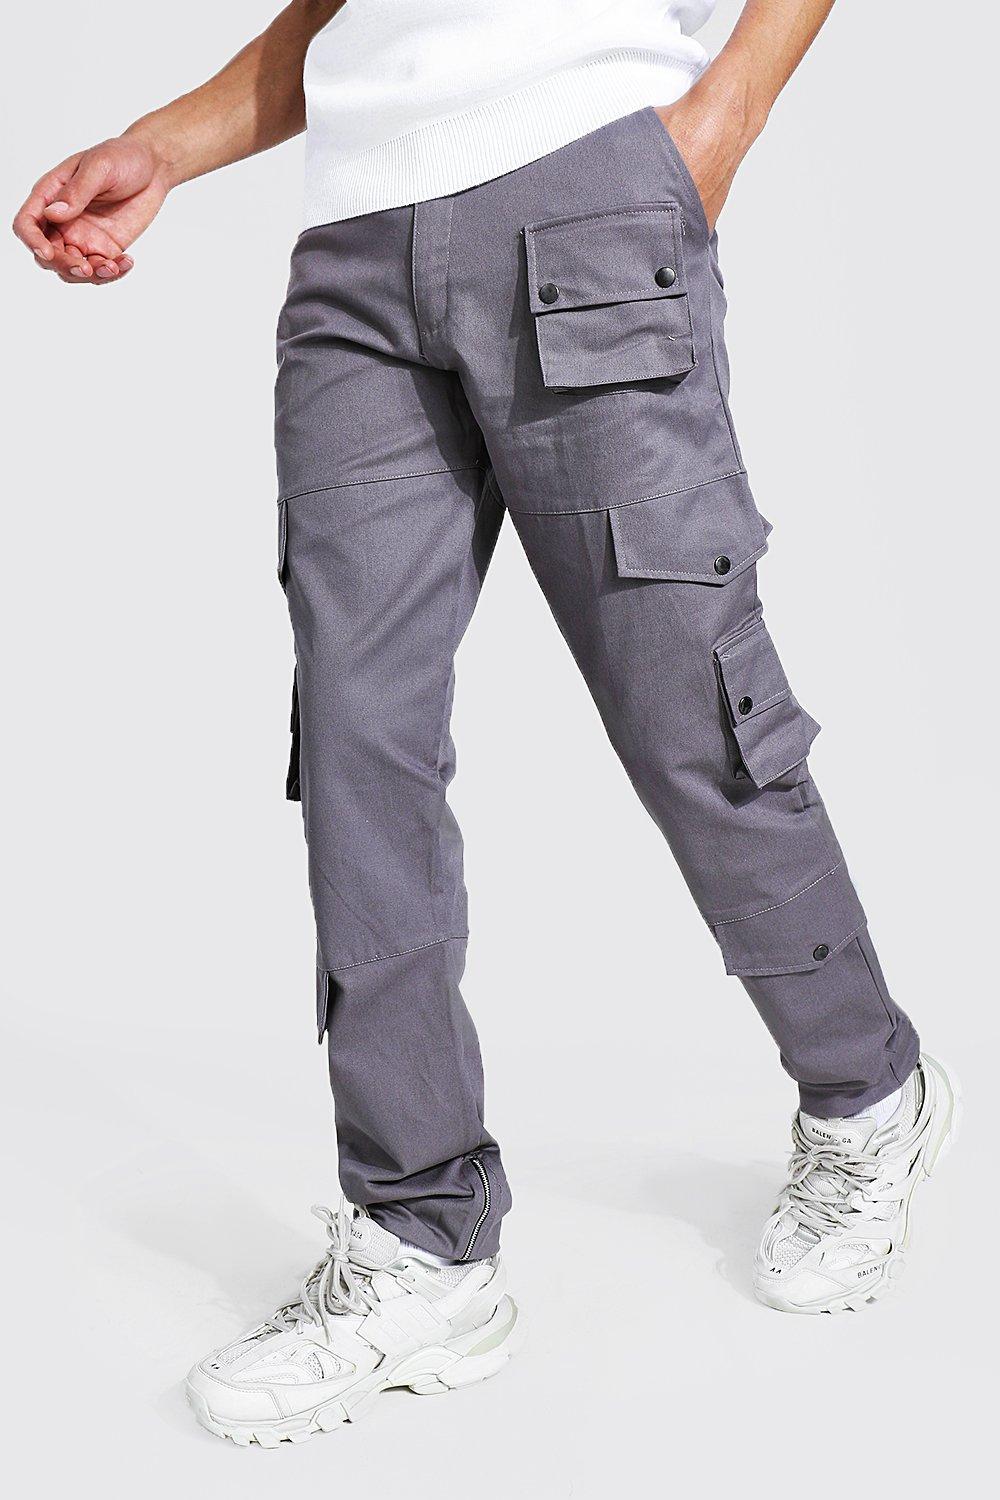 BoohooMAN Tall Relaxed Fit Twill Cargo Pants in Gray for Men | Lyst